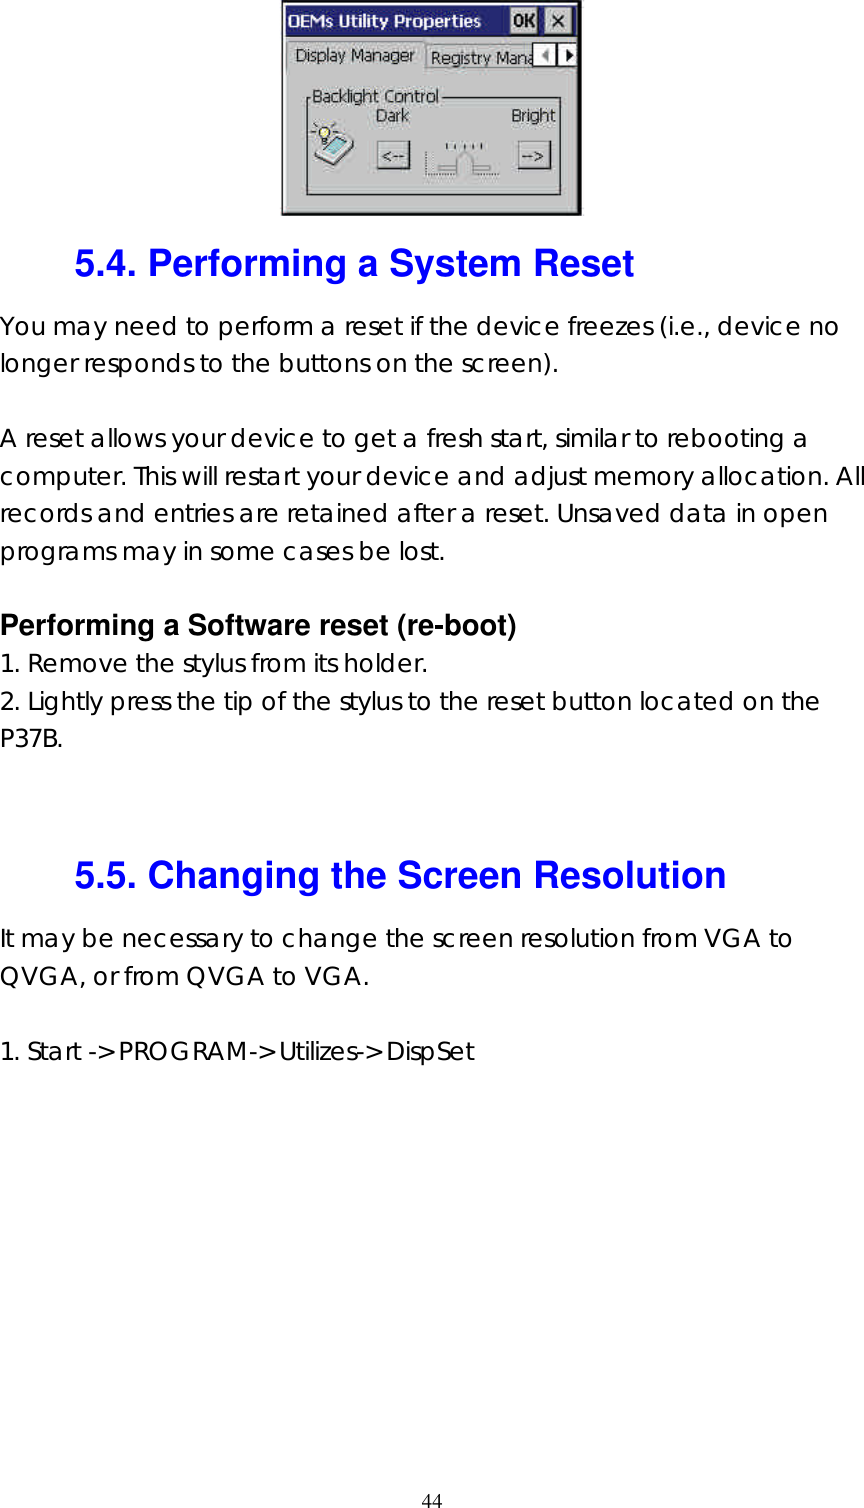  44 5.4. Performing a System Reset You may need to perform a reset if the device freezes (i.e., device no longer responds to the buttons on the screen).  A reset allows your device to get a fresh start, similar to rebooting a computer. This will restart your device and adjust memory allocation. All records and entries are retained after a reset. Unsaved data in open programs may in some cases be lost.  Performing a Software reset (re-boot) 1. Remove the stylus from its holder. 2. Lightly press the tip of the stylus to the reset button located on the P37B.   5.5. Changing the Screen Resolution It may be necessary to change the screen resolution from VGA to QVGA, or from QVGA to VGA.  1. Start -&gt; PROGRAM-&gt; Utilizes-&gt; DispSet 